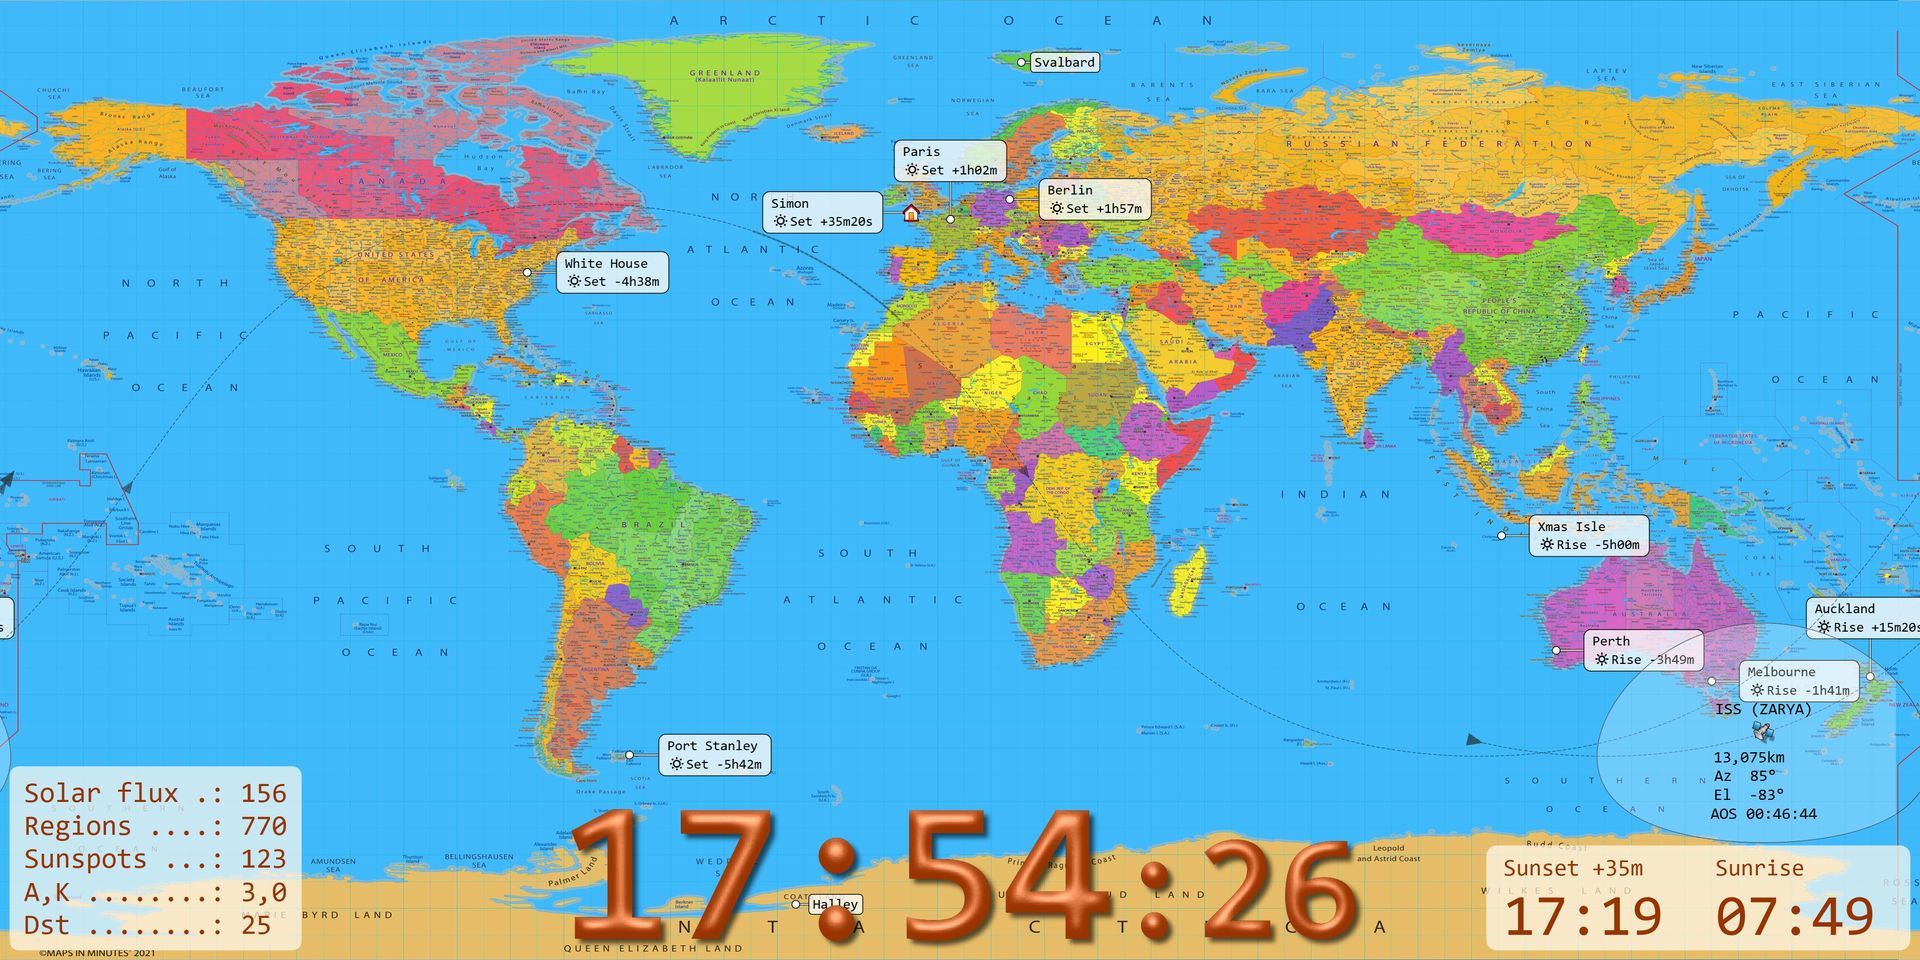 A map of the world with the time of 17:54